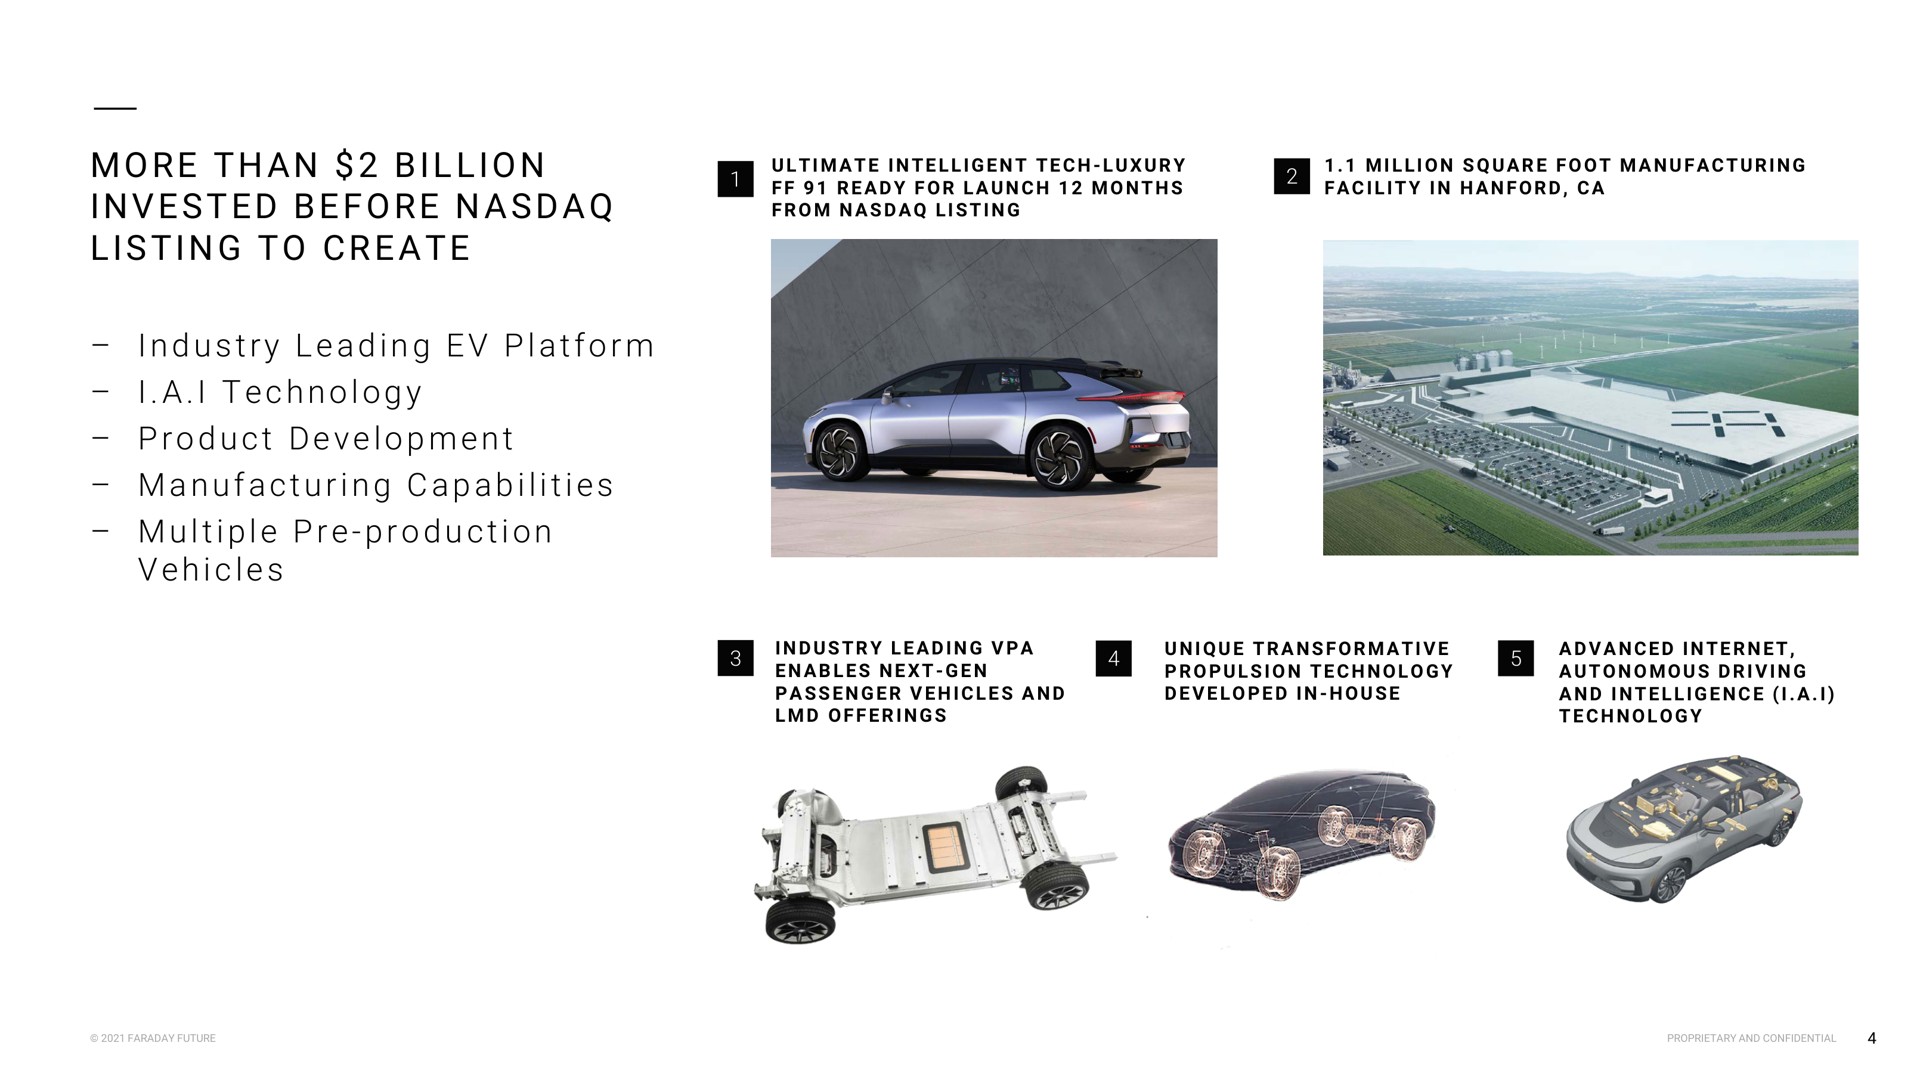 a i i i a a i i a i a i a i a i a a i a a i i i i i i technology ready for launch months from listing facility in product development manufacturing capabilities more than billion invested before listing to create industry leading platform multiple production | Faraday Future